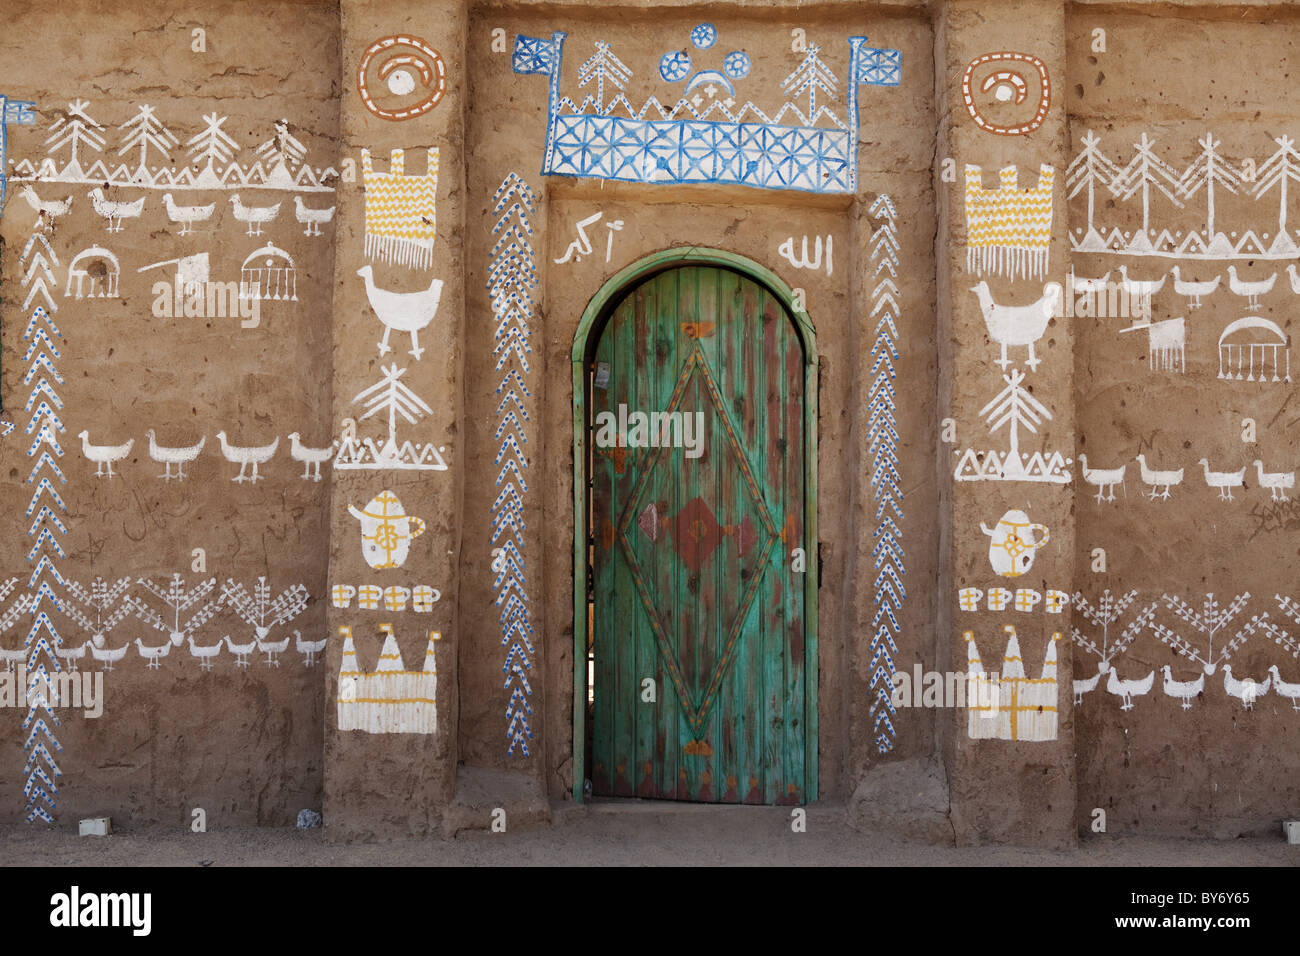 Facade of an old nubian house in the Nubian Museum, Aswan, Egypt, Africa Stock Photo